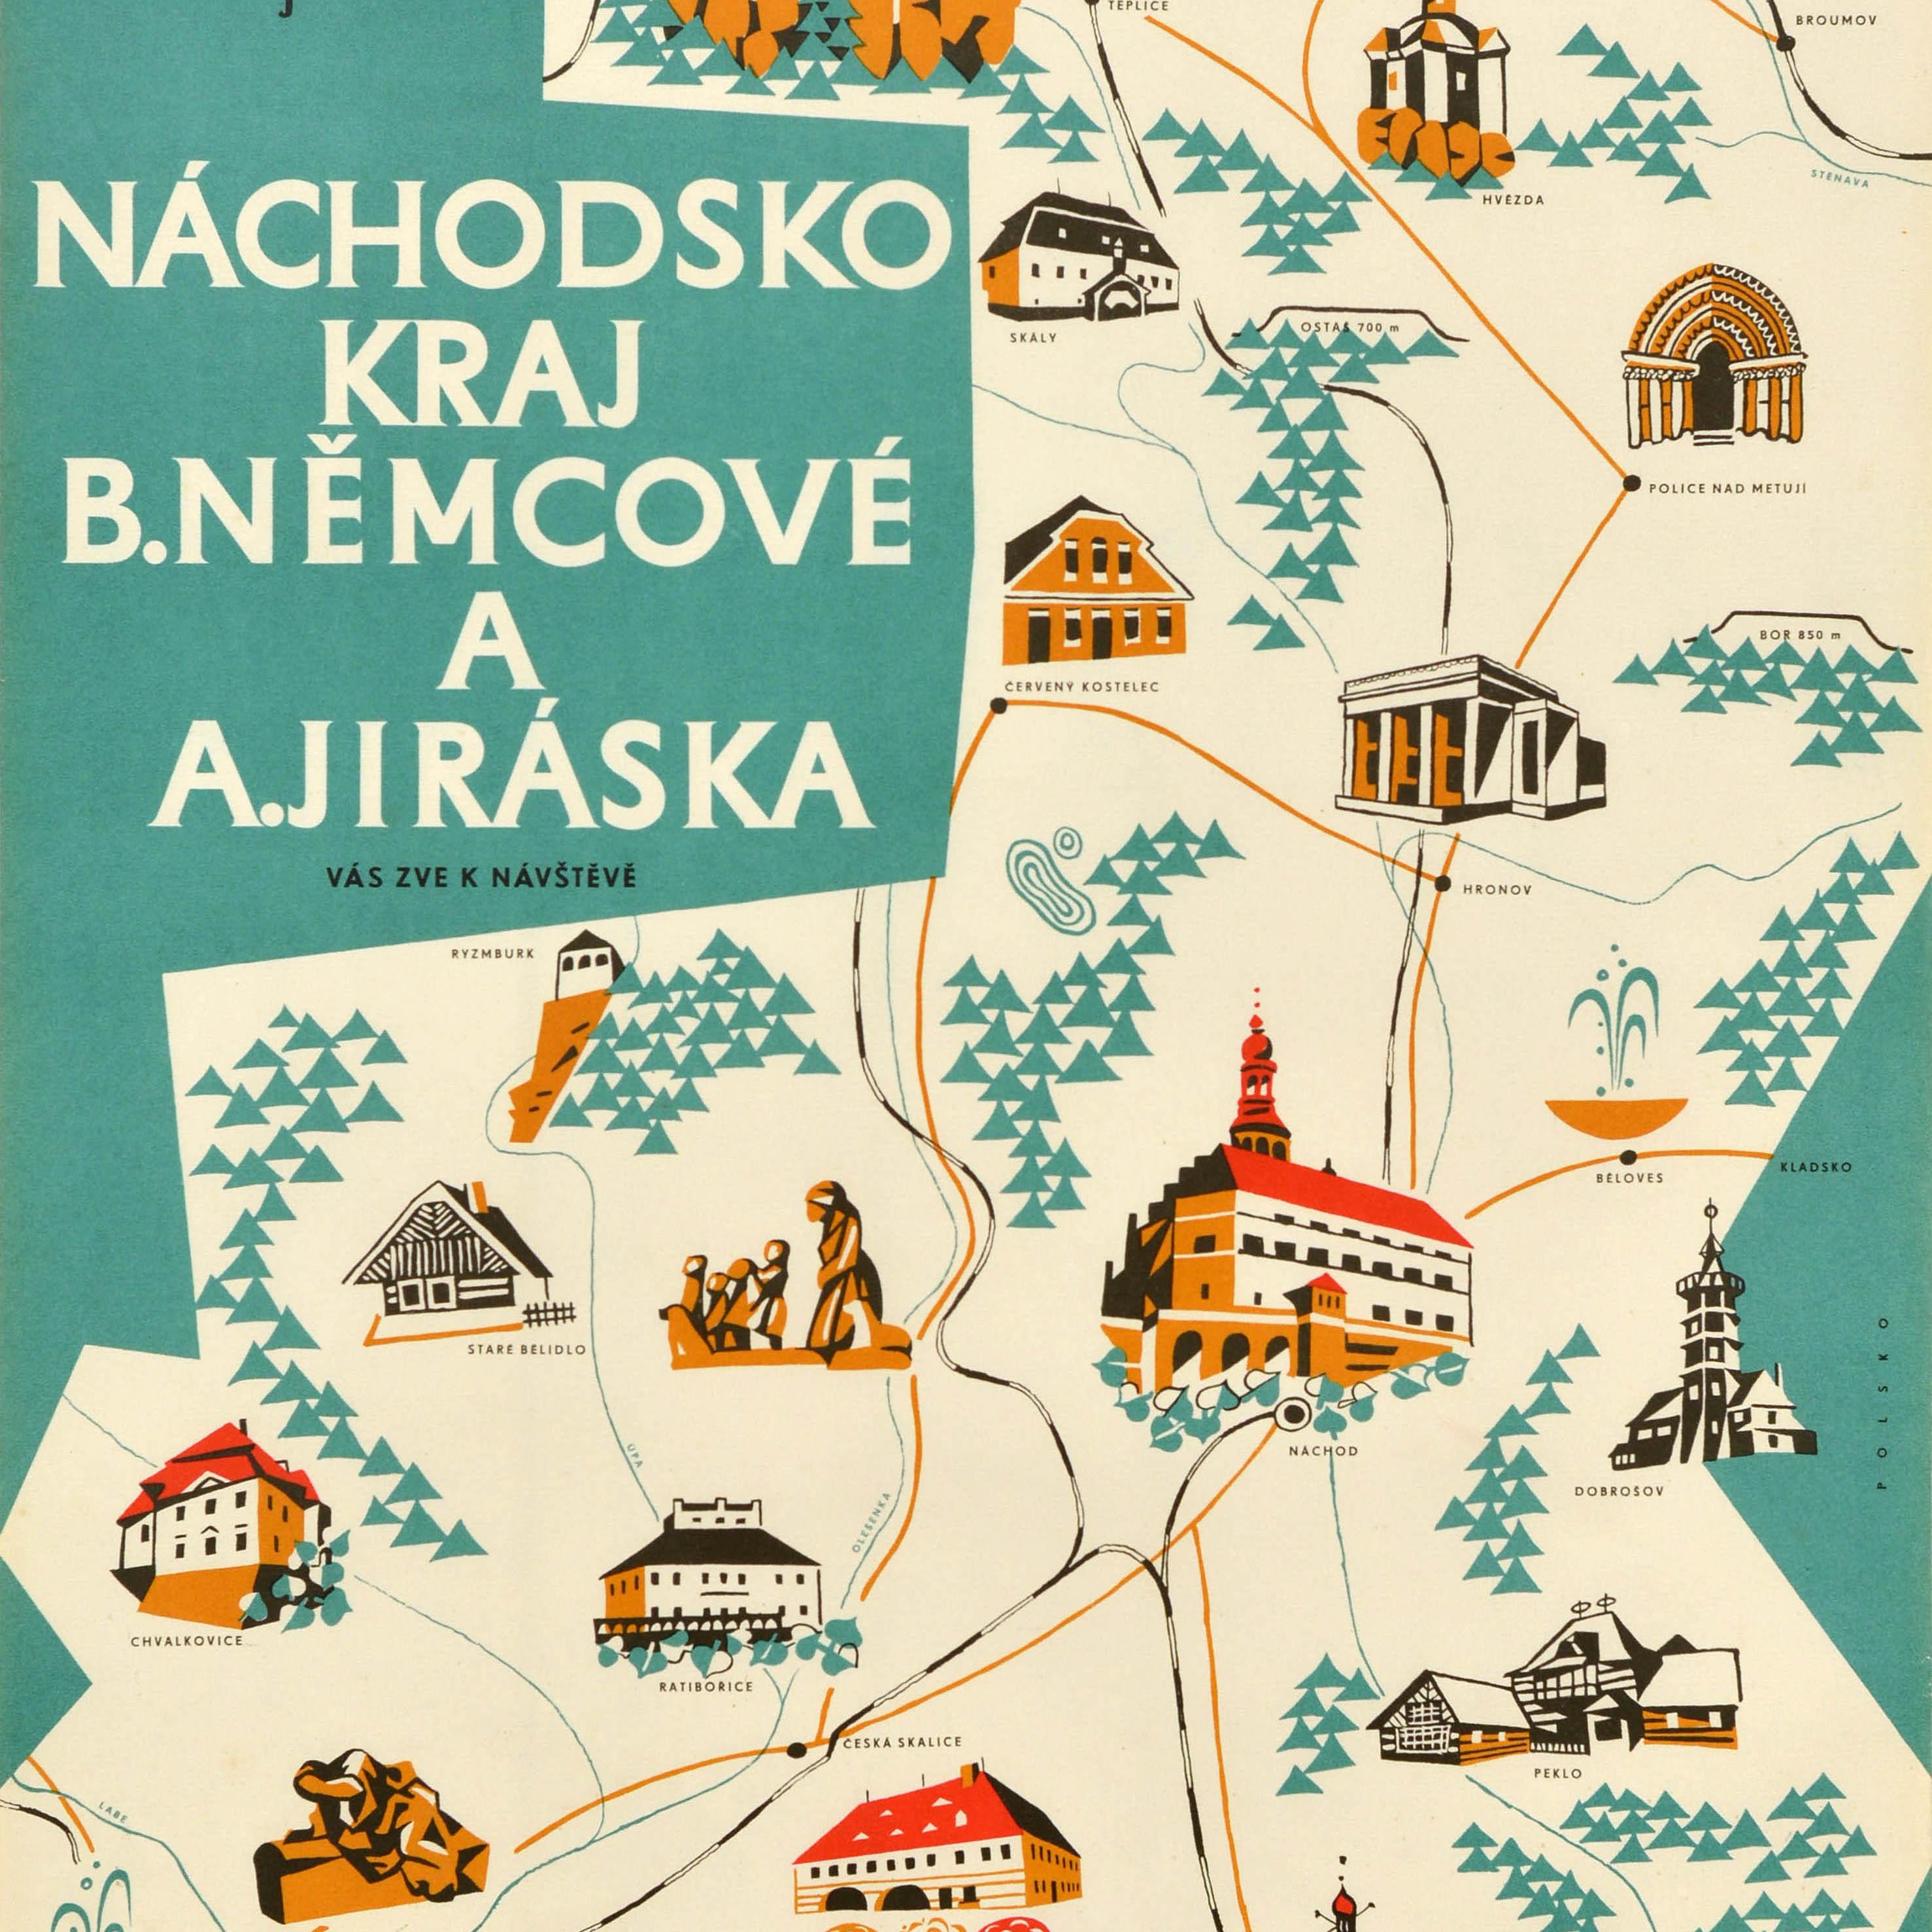 Original vintage pictorial travel map Nachod Region B. Nemcove and A. Jiraska invite you to visit / Nachodsko Kraj B. Nemcove a A. Jiraska vas zve k navsteve, featuring a pictorial map of Nachod Region marking the local places of interest with